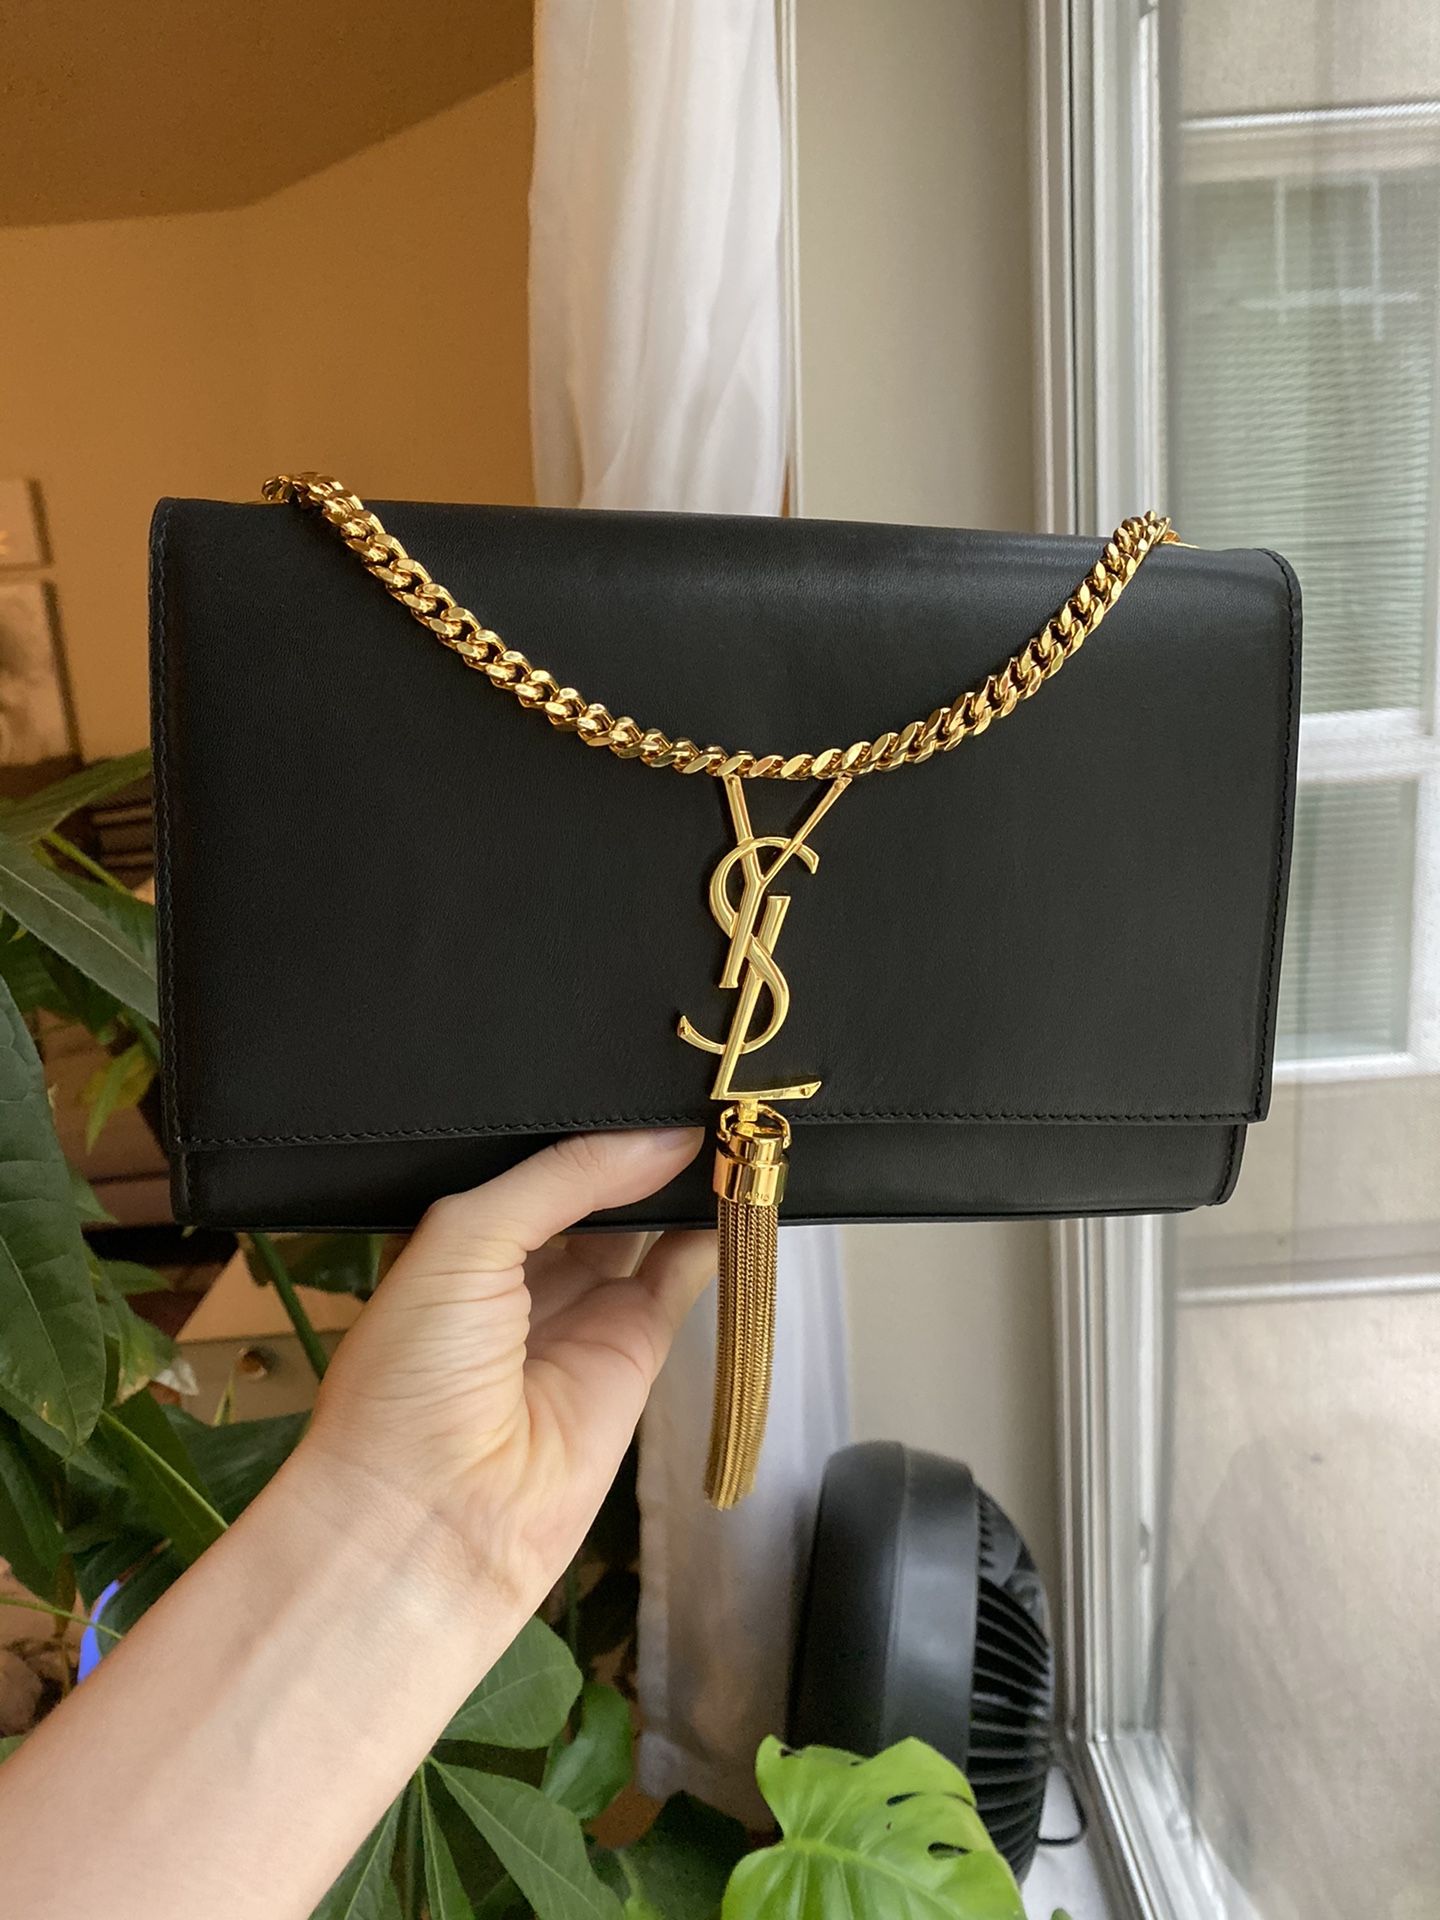 Ysl Kate smooth leather crossbody bag with tassel